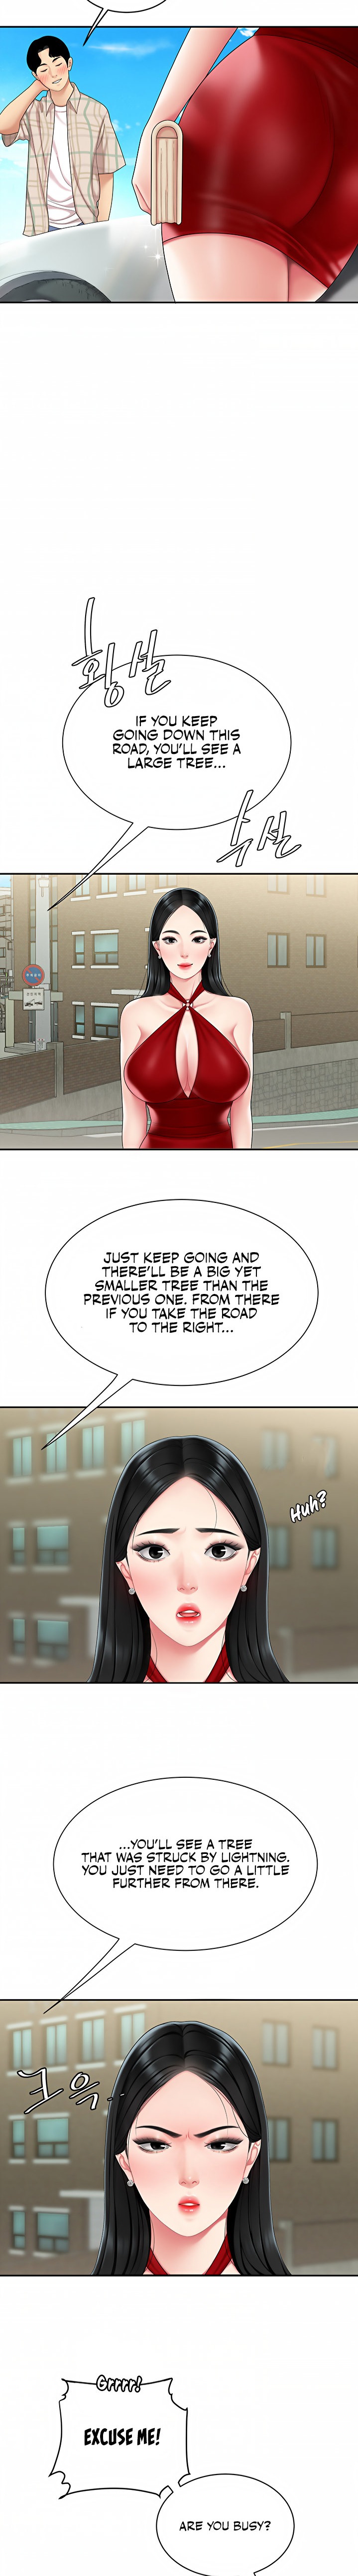 I Want A Taste - Chapter 5 Page 4